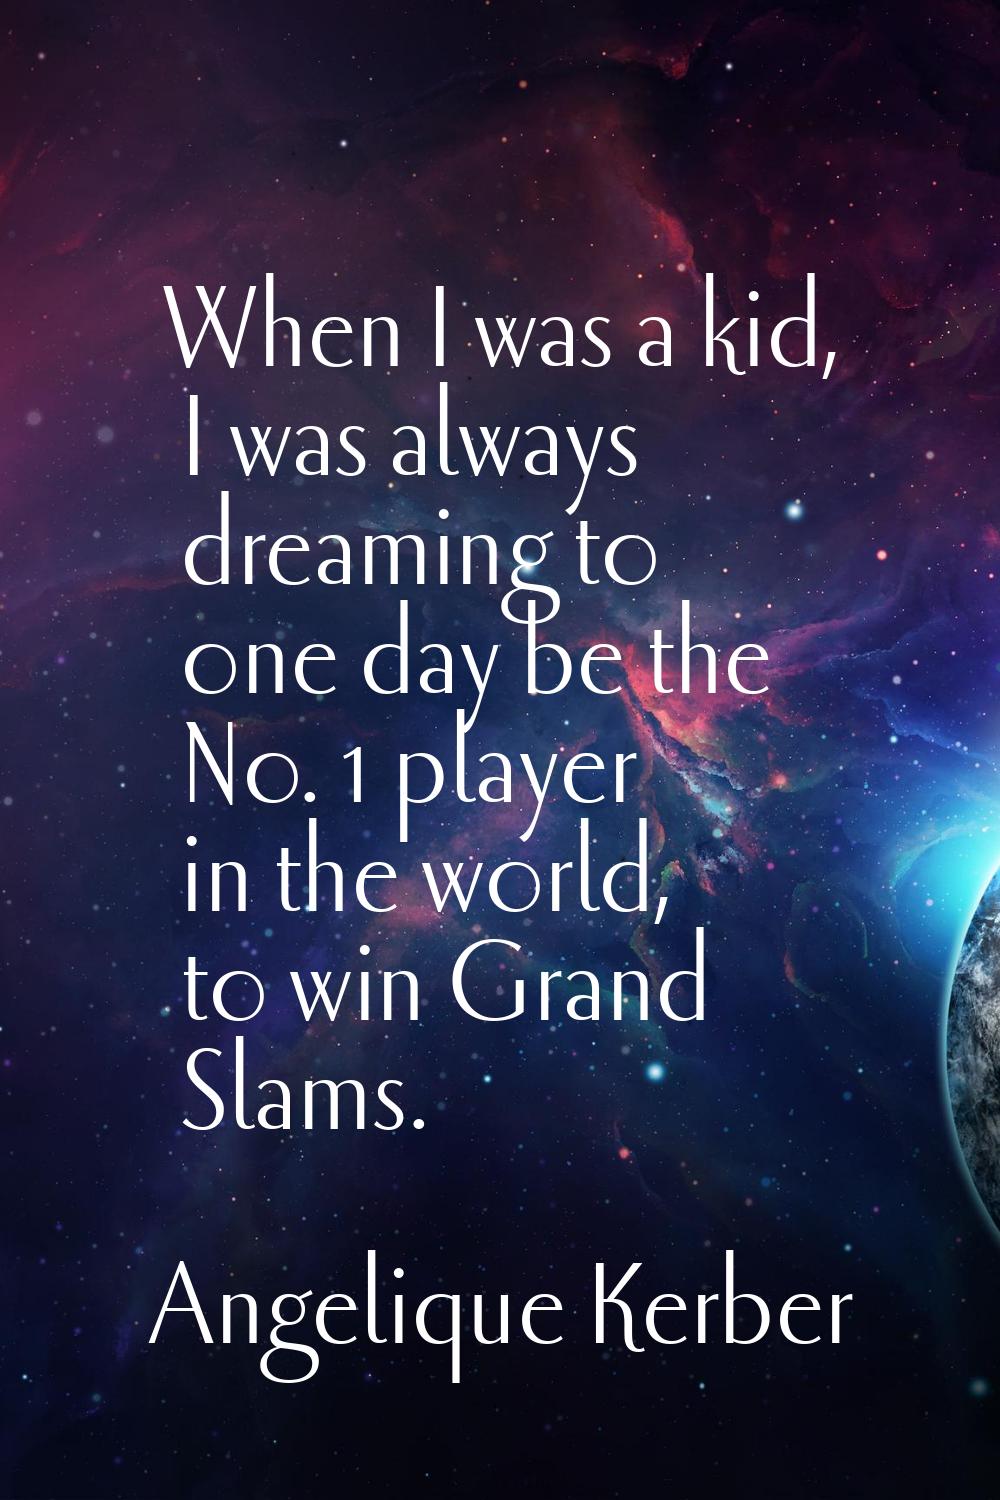 When I was a kid, I was always dreaming to one day be the No. 1 player in the world, to win Grand S